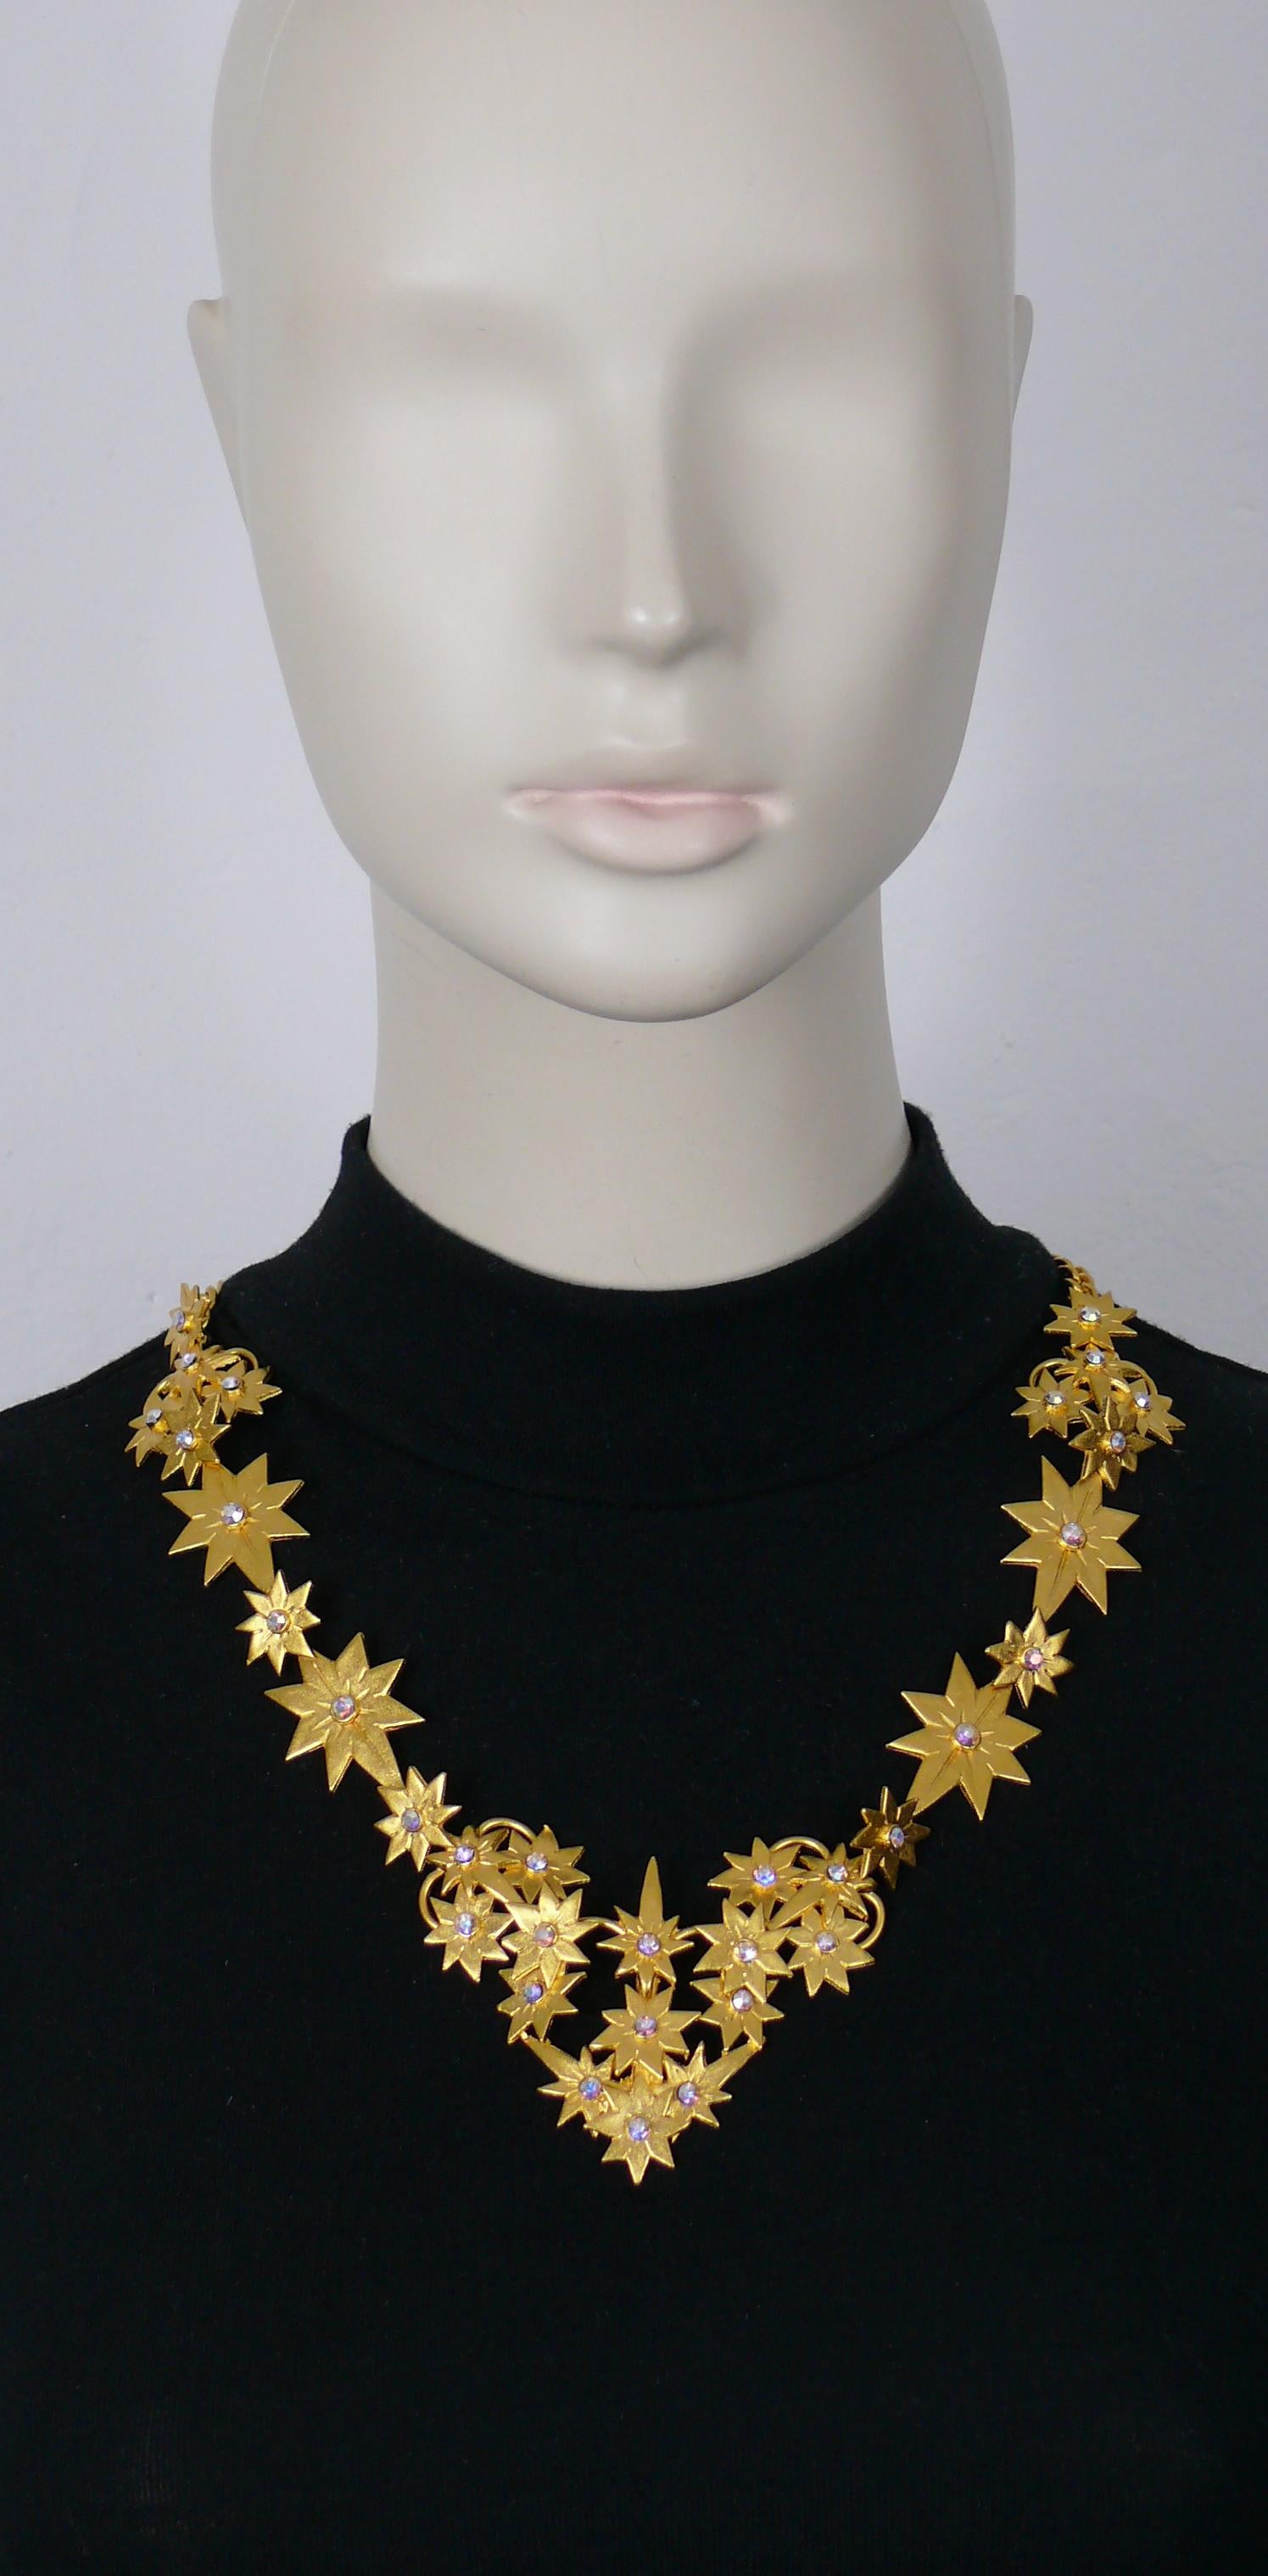 L'OR DU SOIR vintage gold tone necklace featuring stars embellished with aurora borealis crystals.

Toggle and loop closure.

Embossed L'OR DU SOIR.

Indicative measurements : length approx. 57.5 cm (22.64 inches) / max. width approx. 5.5 cm (2.17